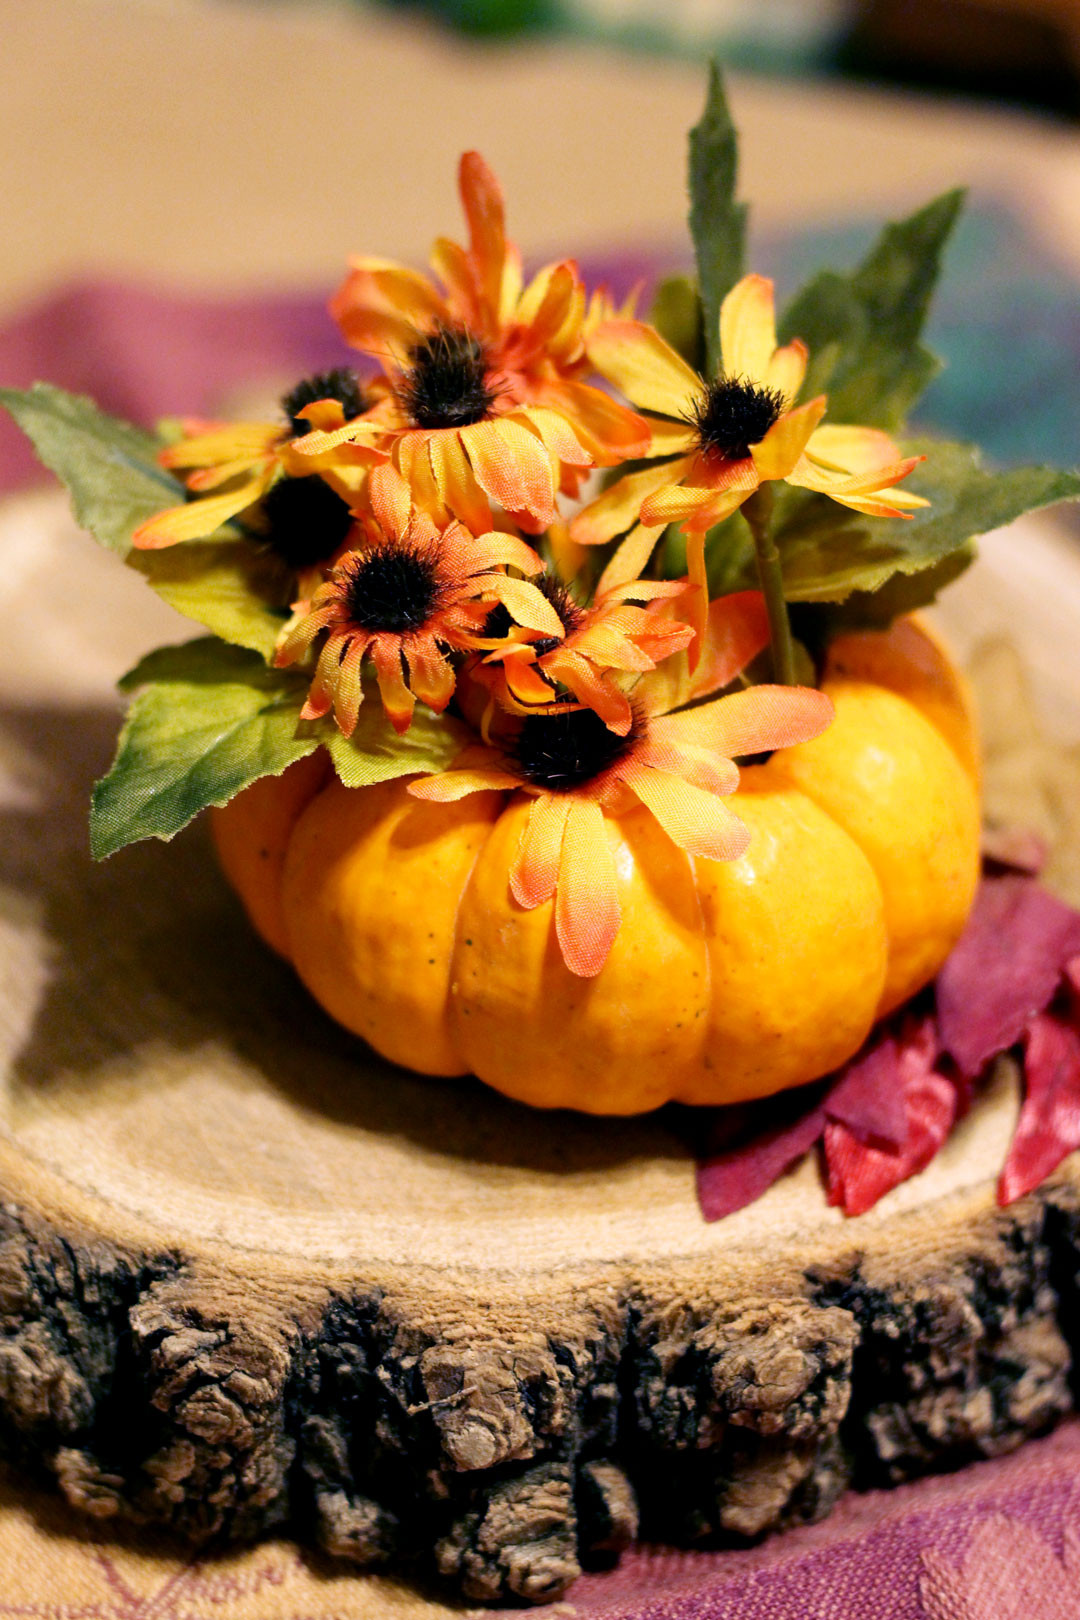 Easy Thanksgiving Table Decorations
 Make easy Thanksgiving table decorations or favors from